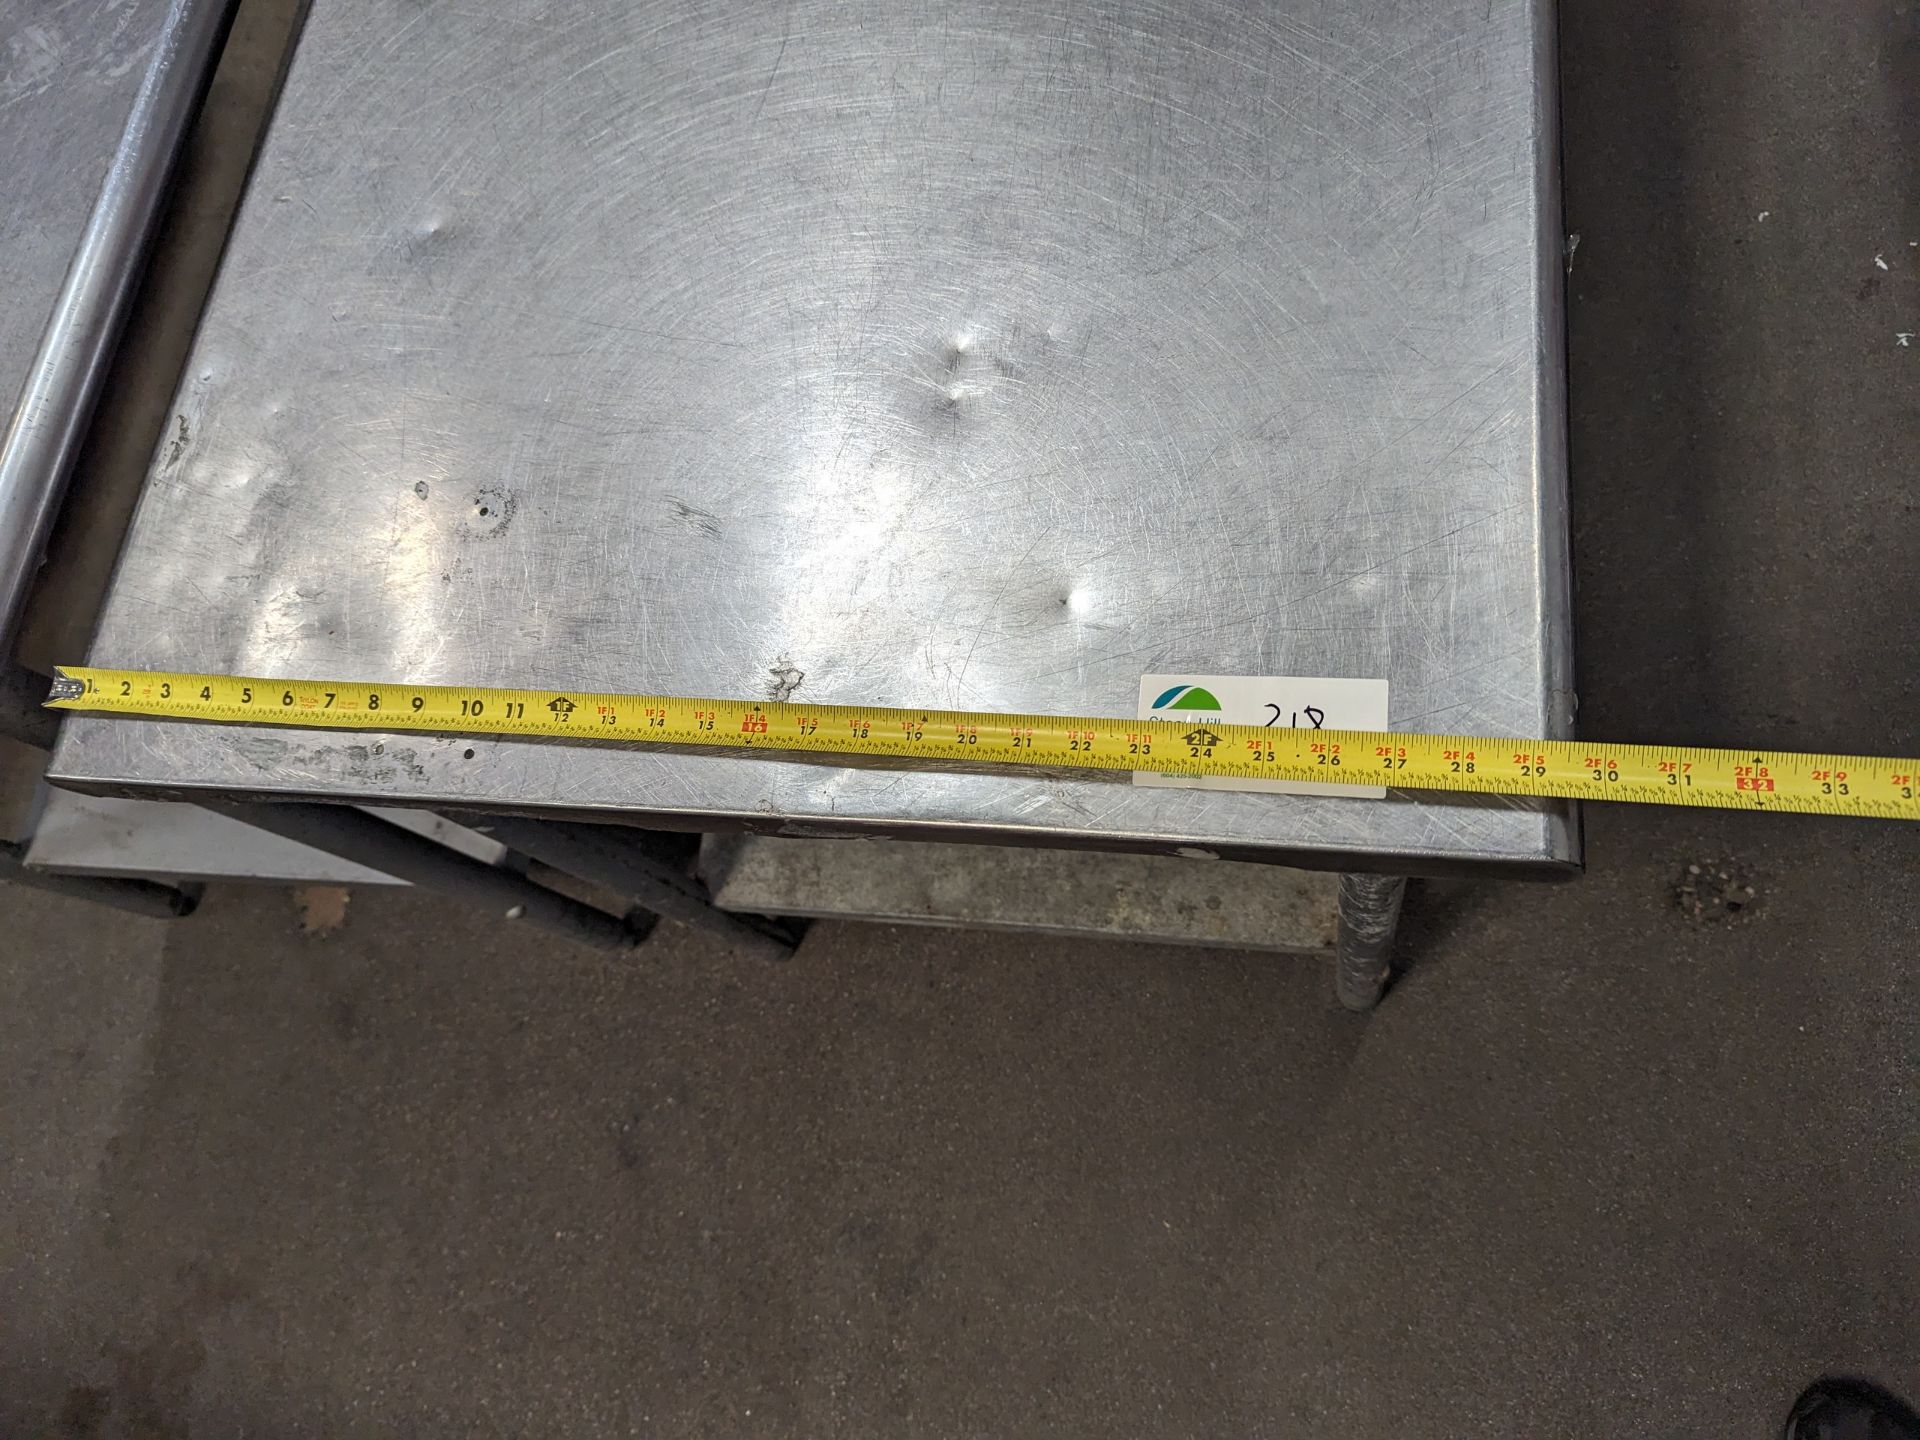 Lot of 2 5ft Long SS Tables, Dimensions LxWxH: 60x30x35 each - Image 4 of 7